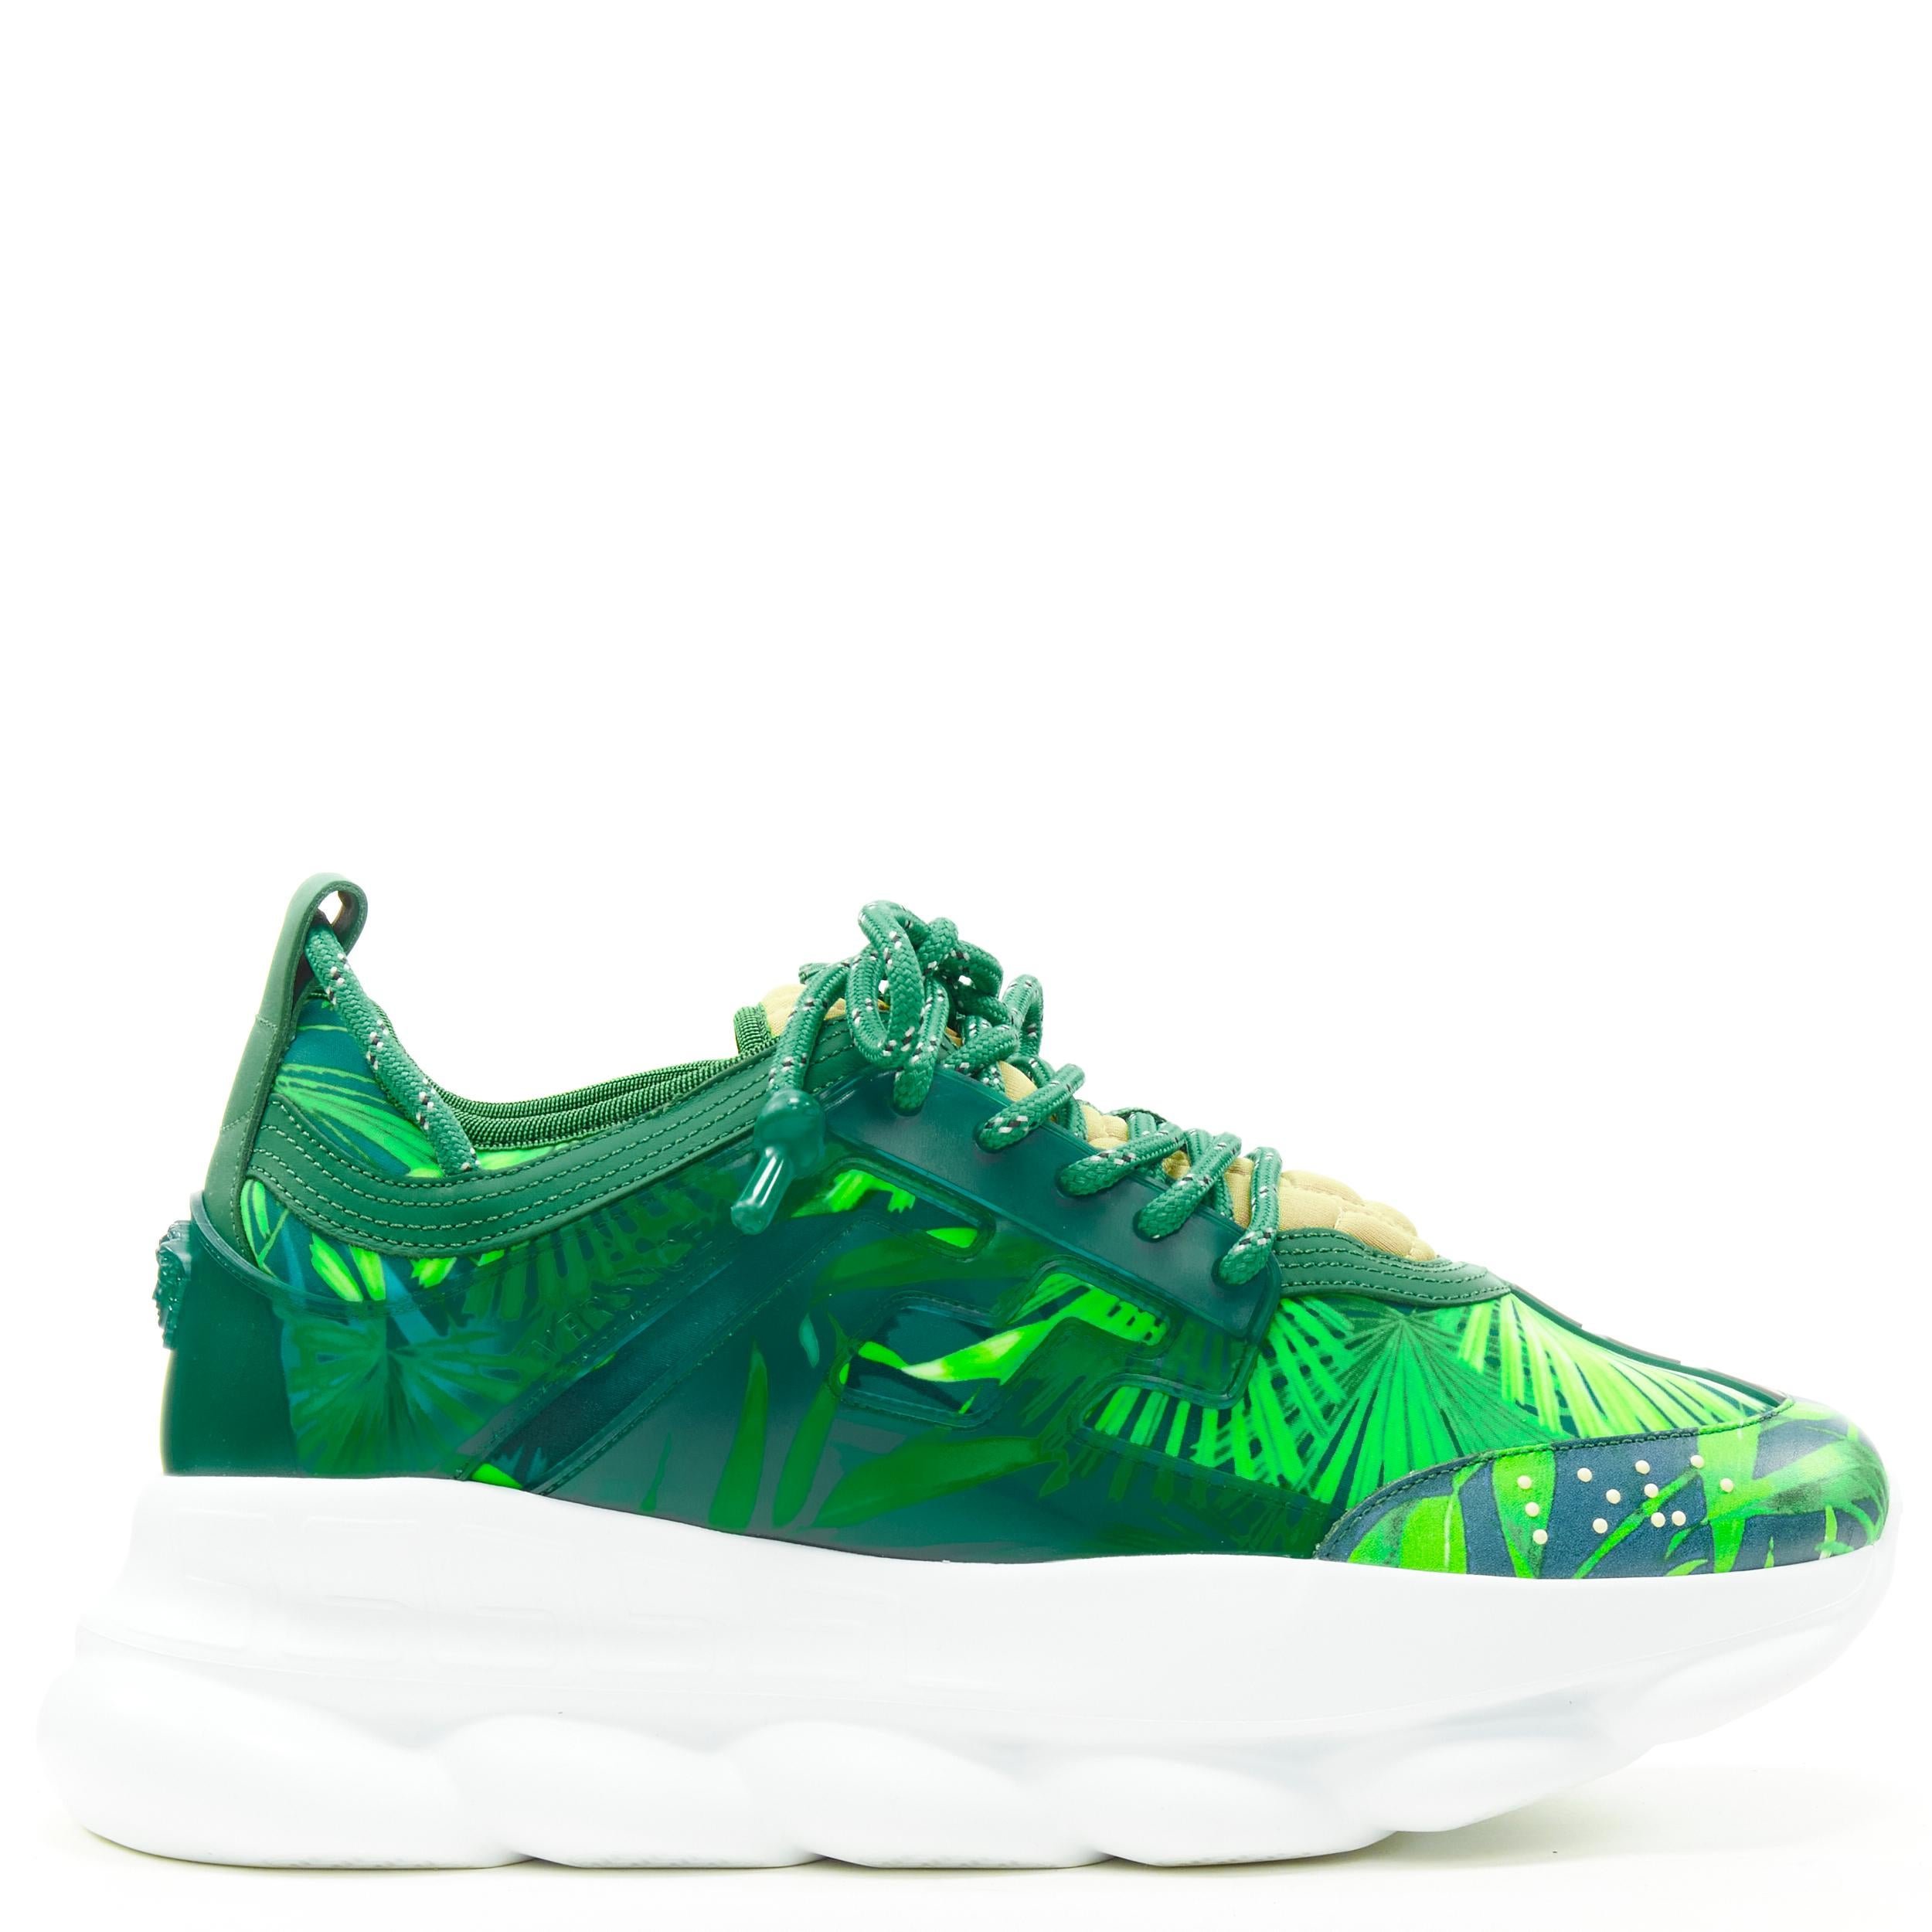 new VERSACE Chain Reaction Jungle Print green chunky sole sneaker EU43.5 rare 
Reference: TGAS/C00106 
Brand: Versace 
Designer: Donatella Versace 
Model: Chain Reaction 
Collection: Spring Summer 2020 Runway 
Material: Leather 
Color: Green